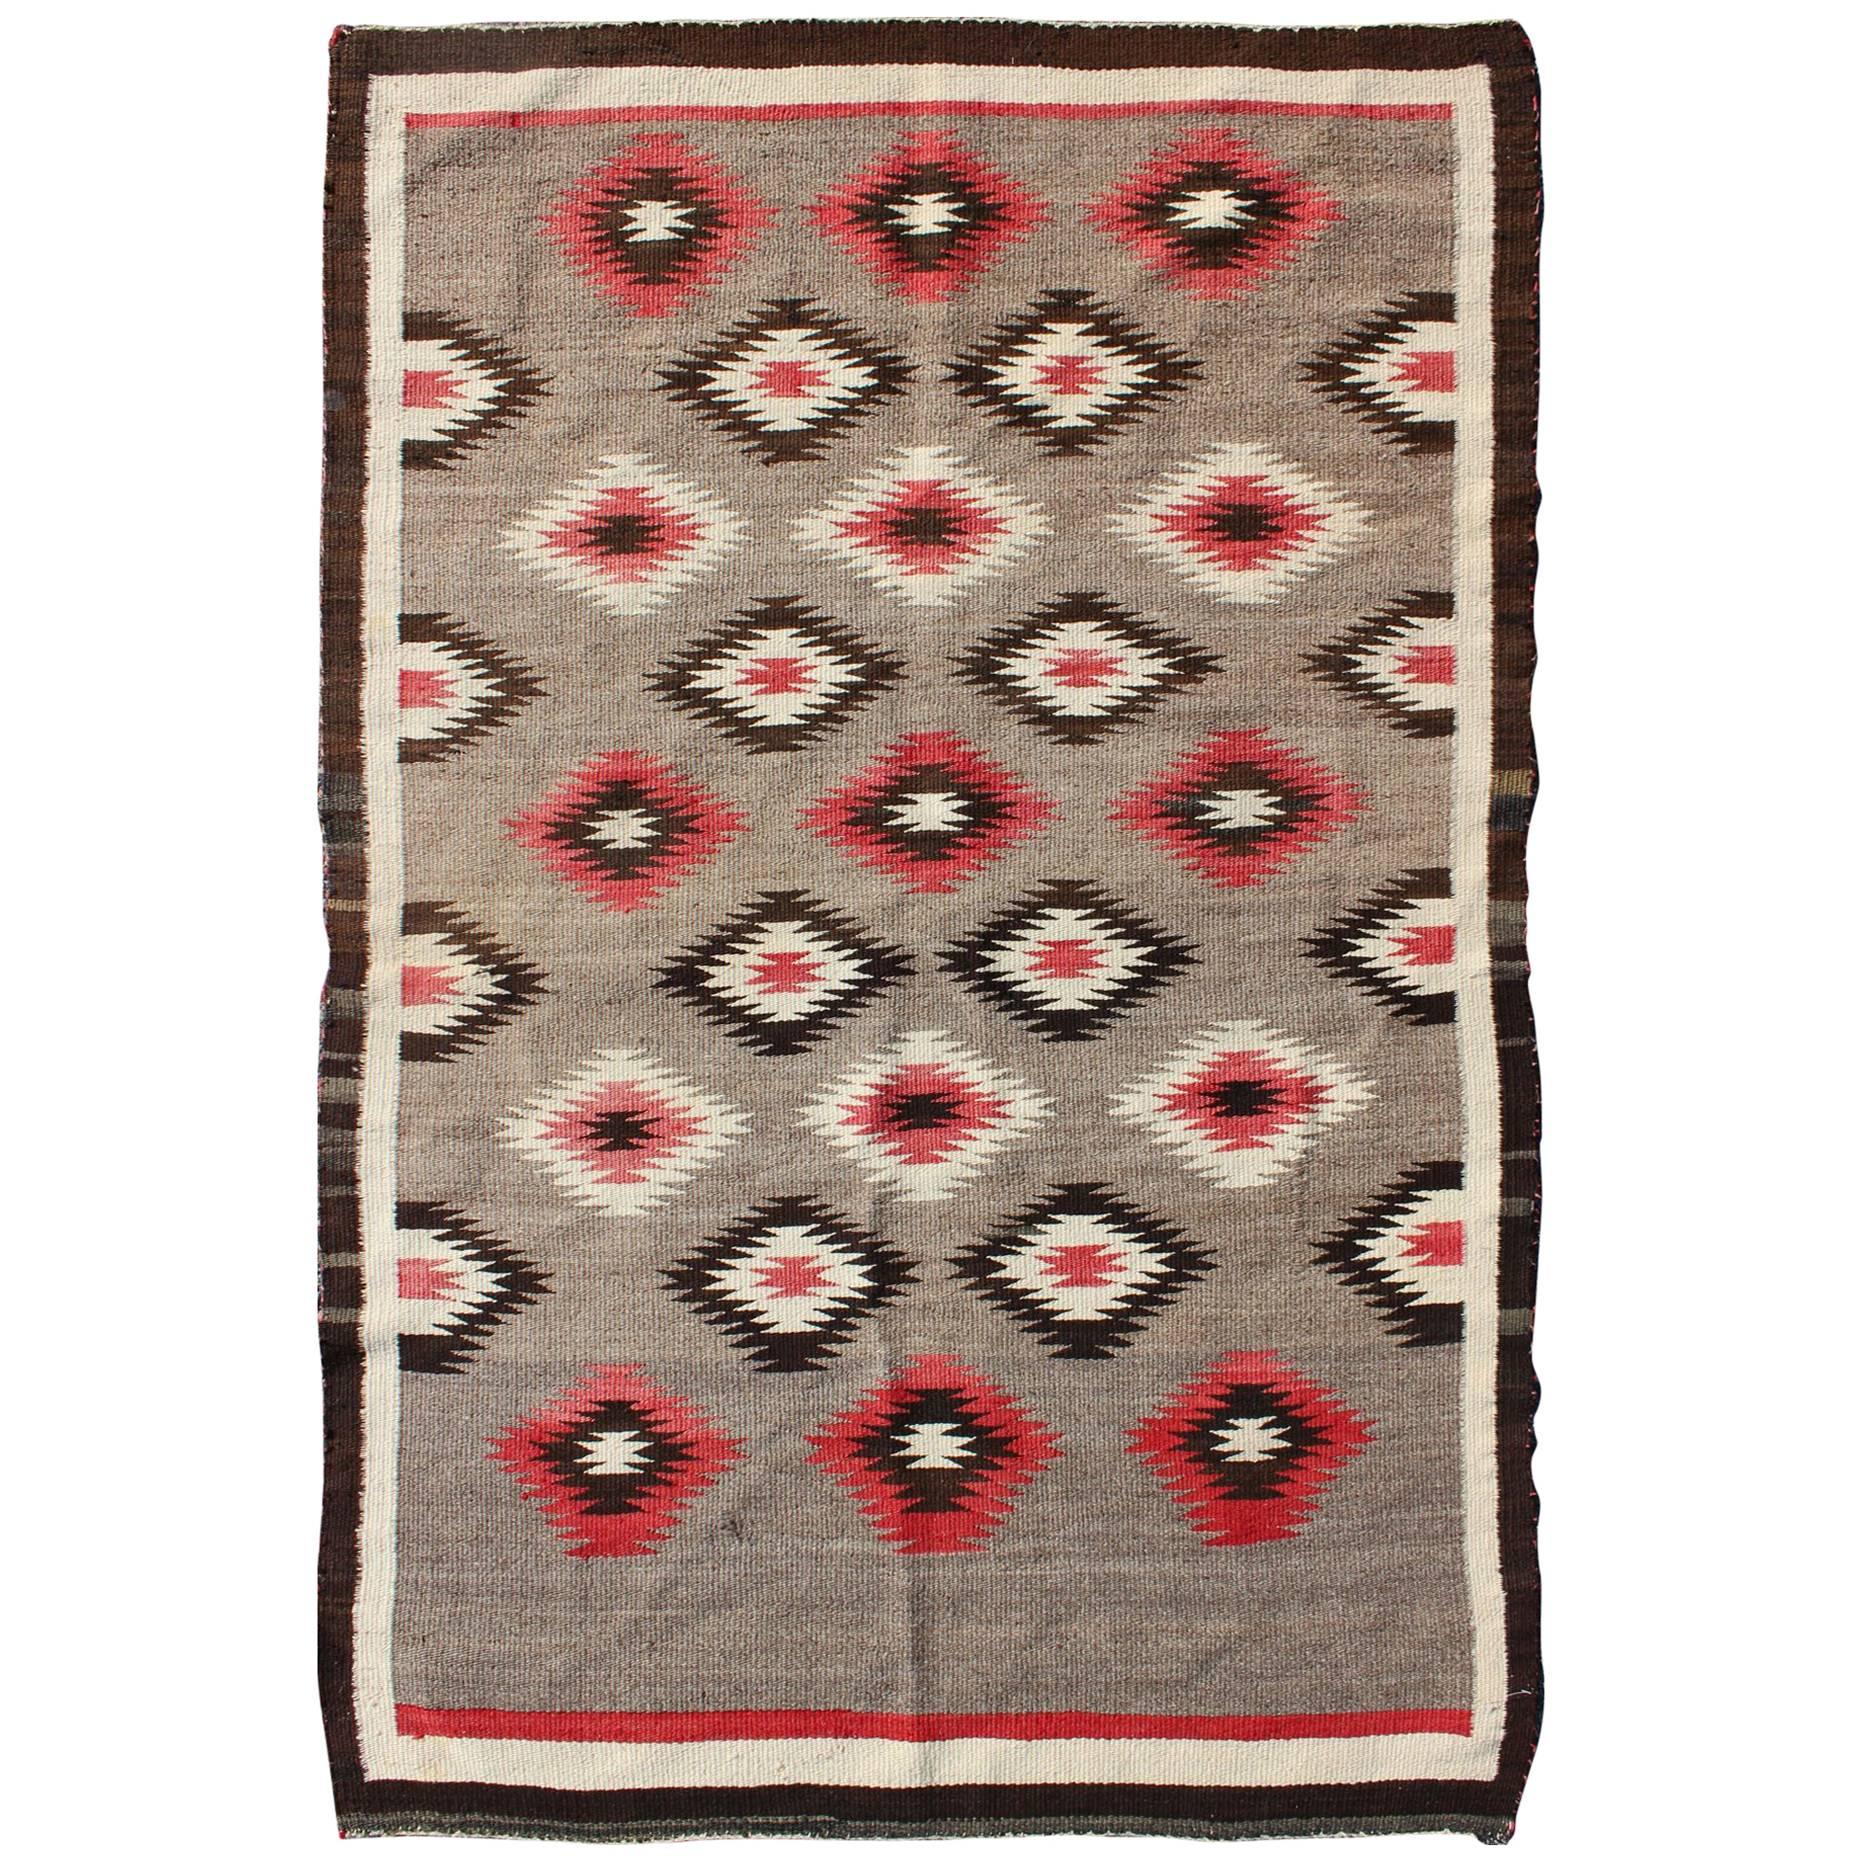 American Navajo Rug with Geometric All-Over Design in Reds and Browns